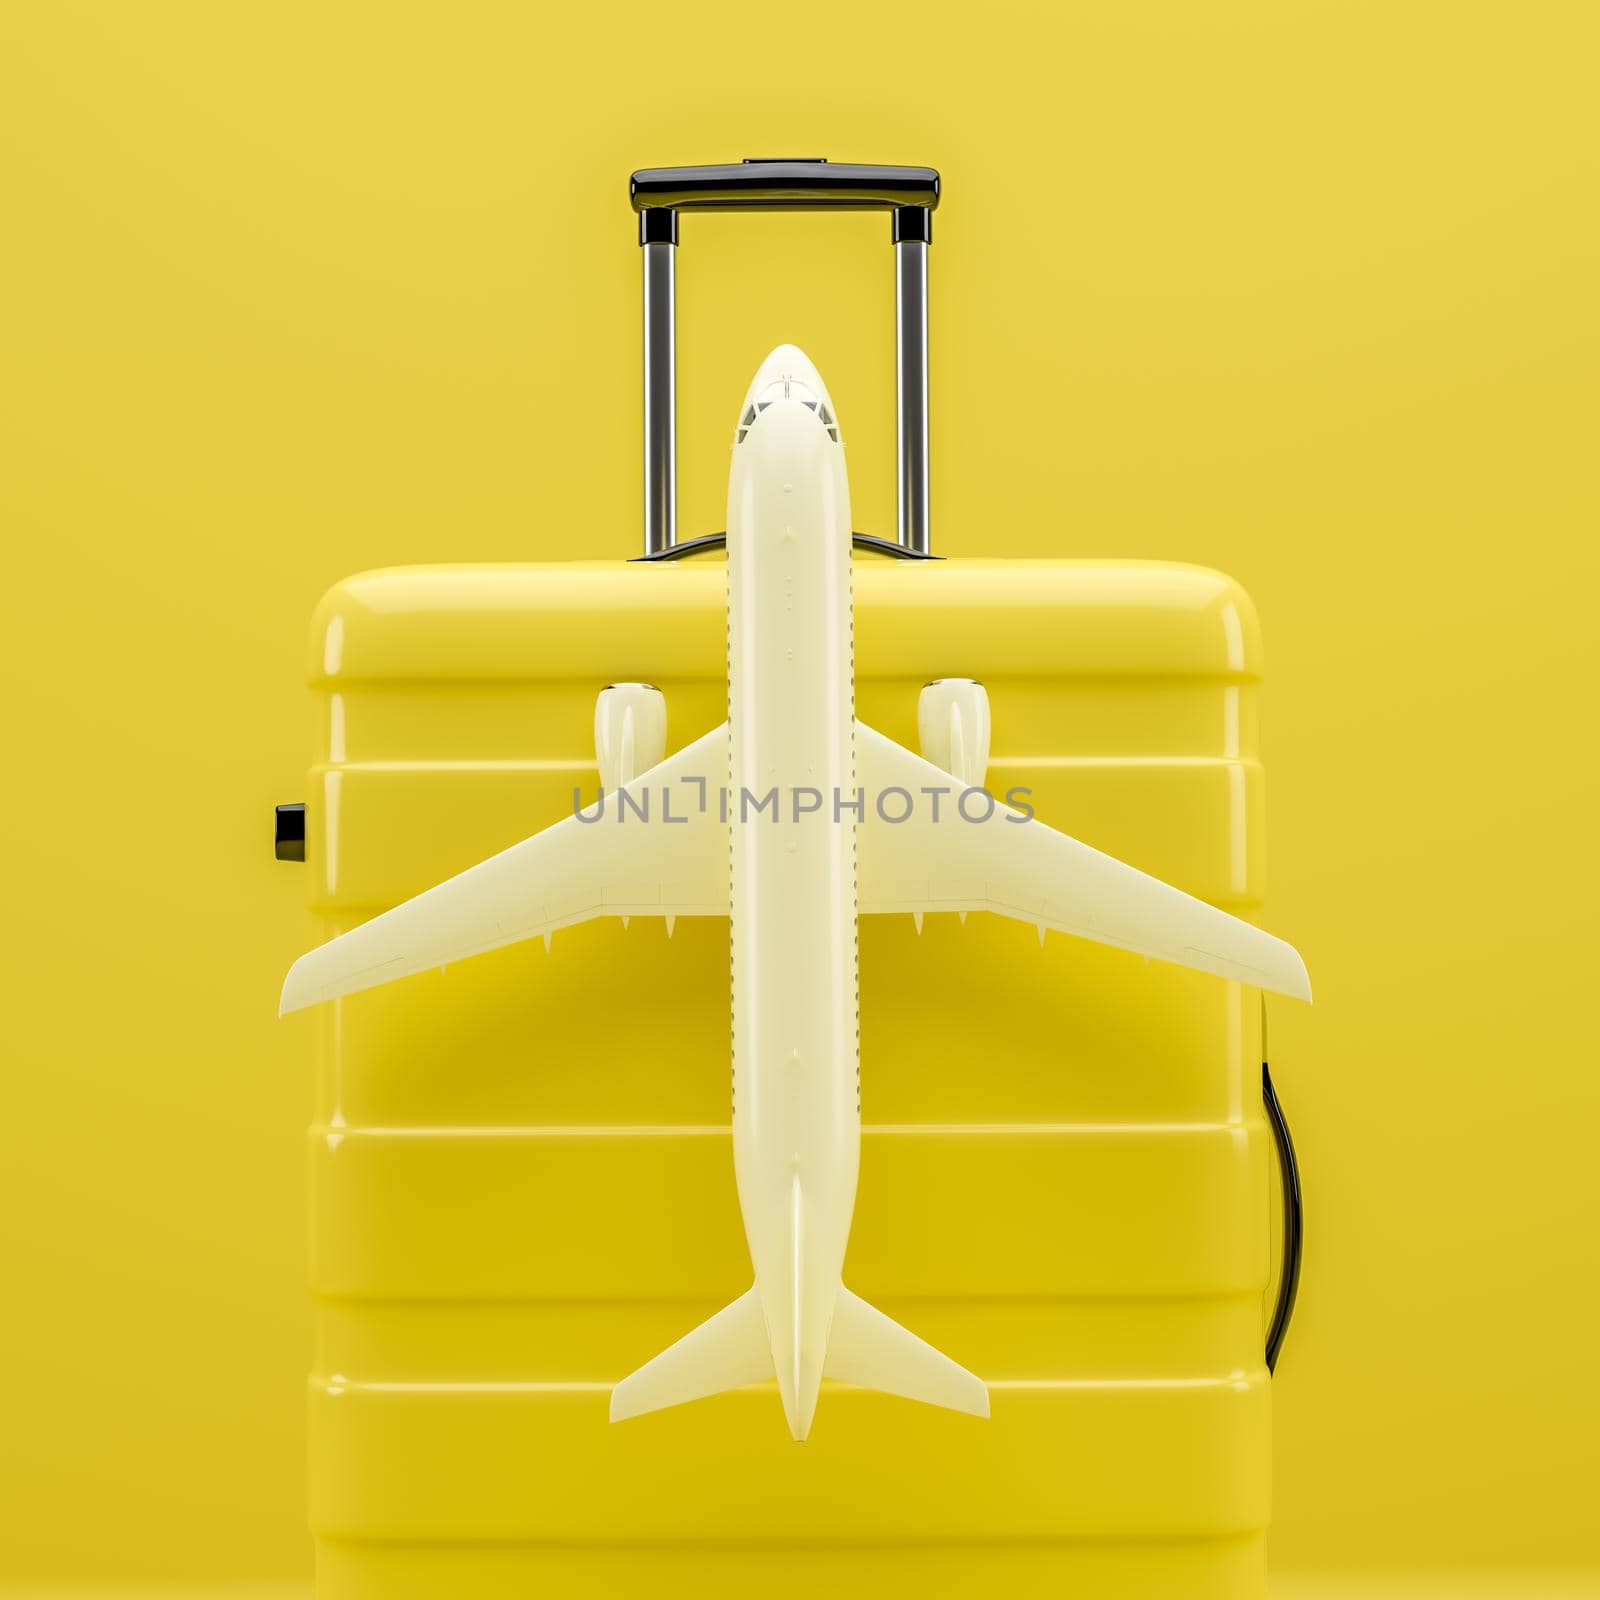 A white plane on a yellow travel suitcase, 3D rendering illustration.